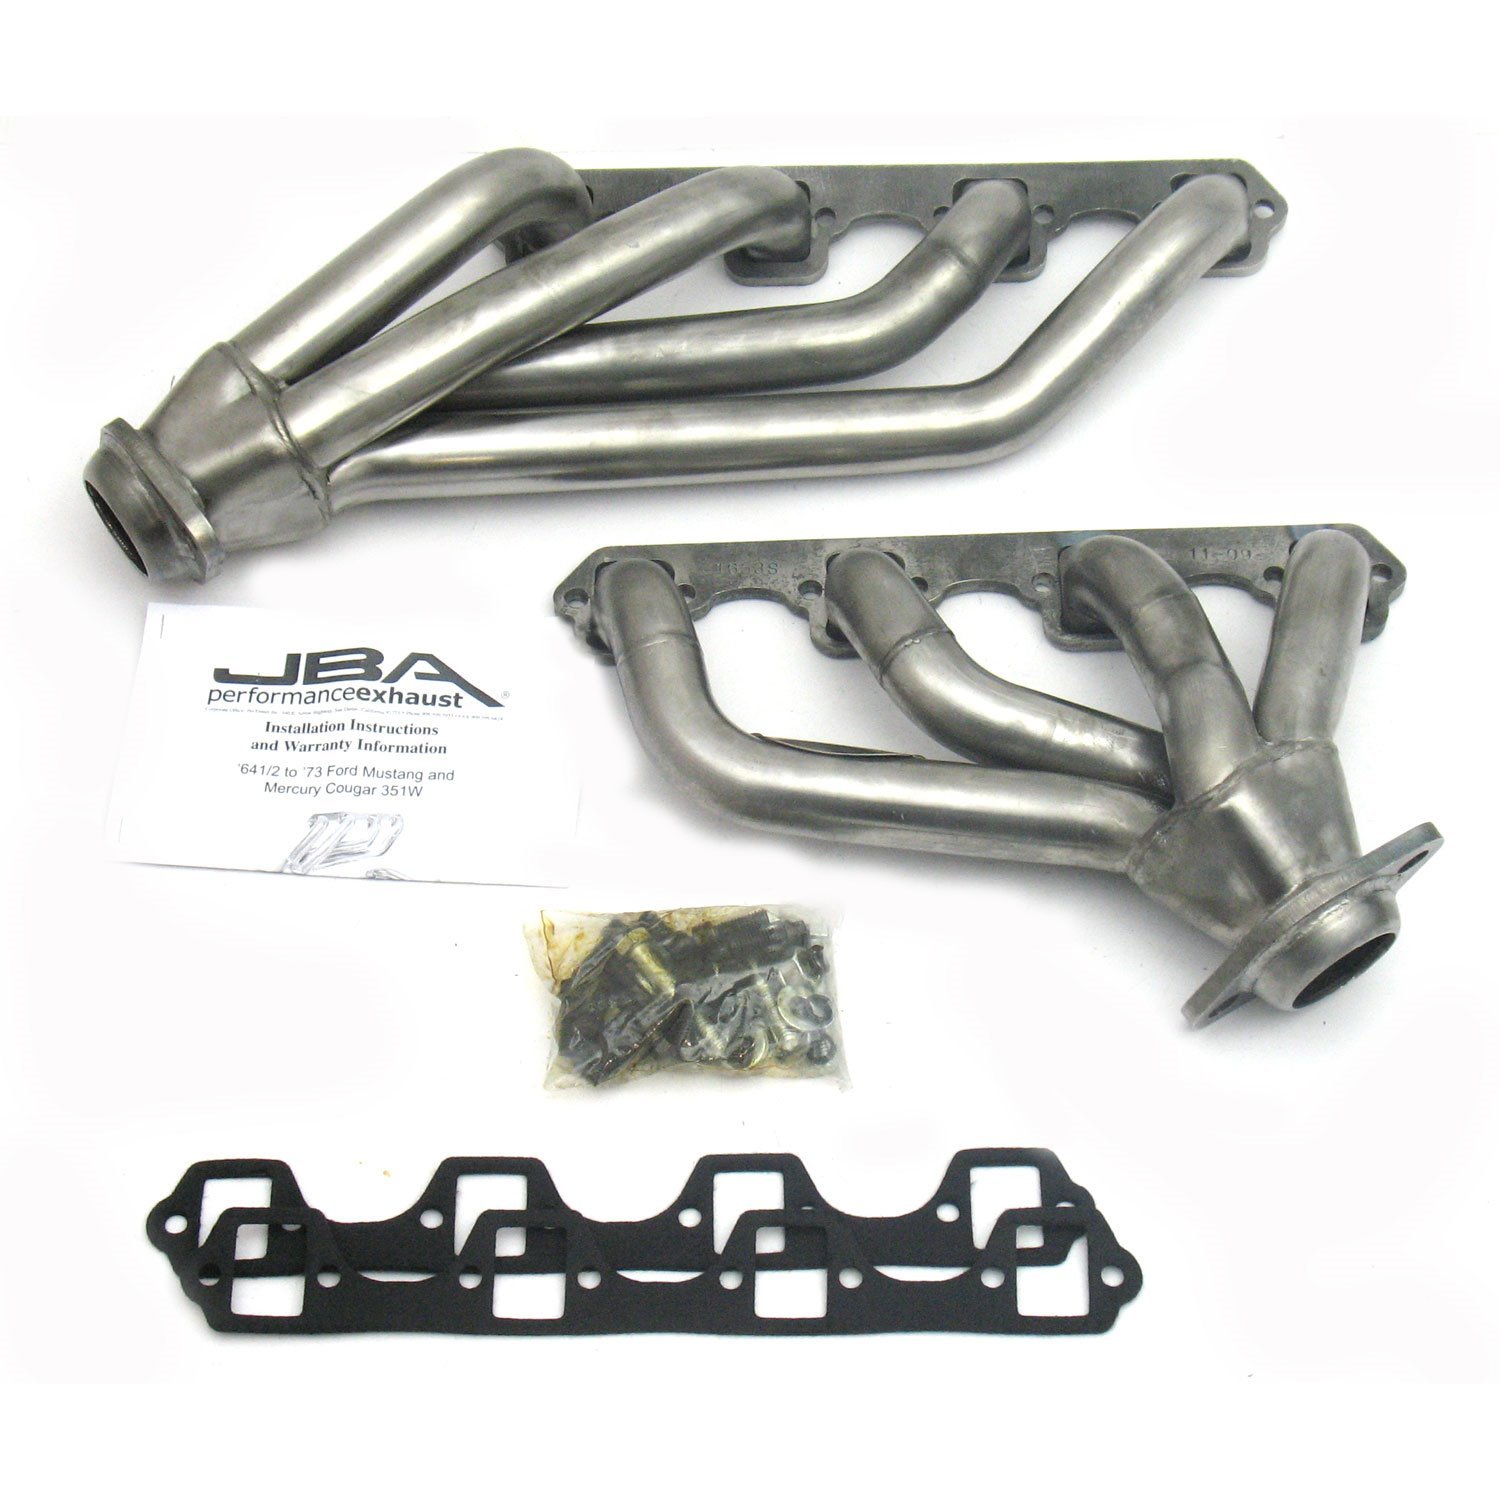 Ford shorty headers